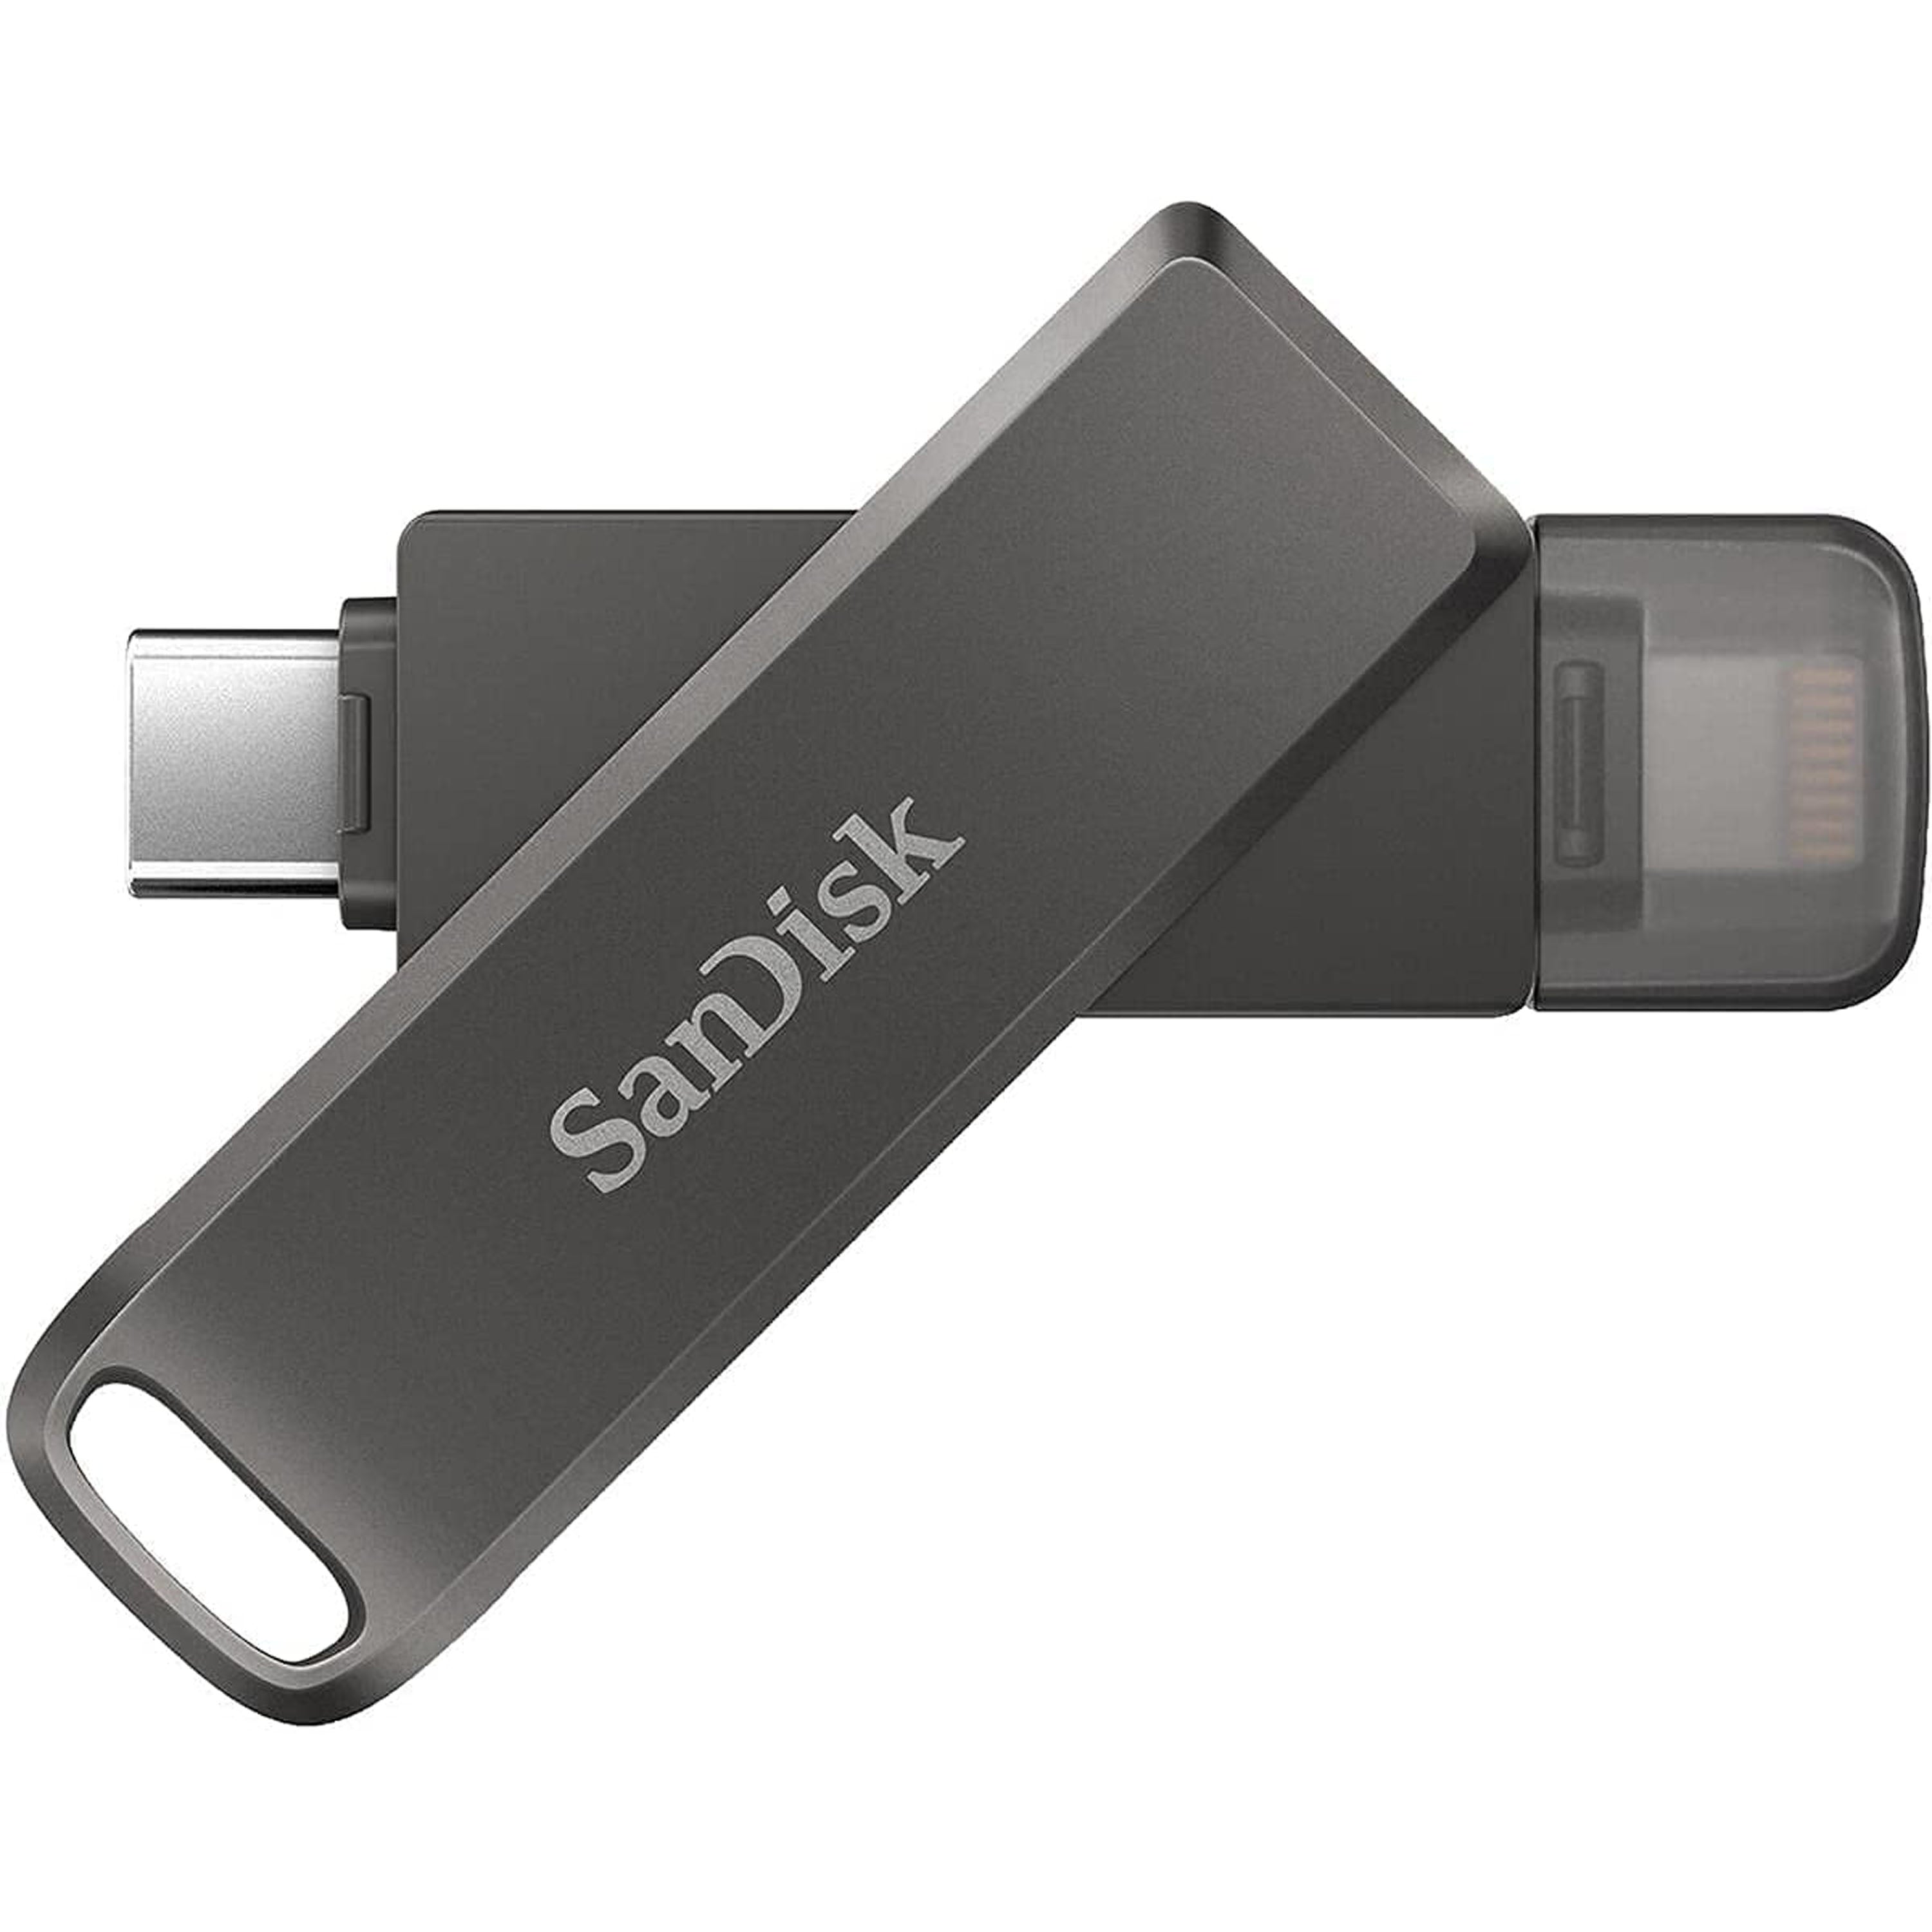 Sandisk iXpand Flash Drive Luxe 64GB